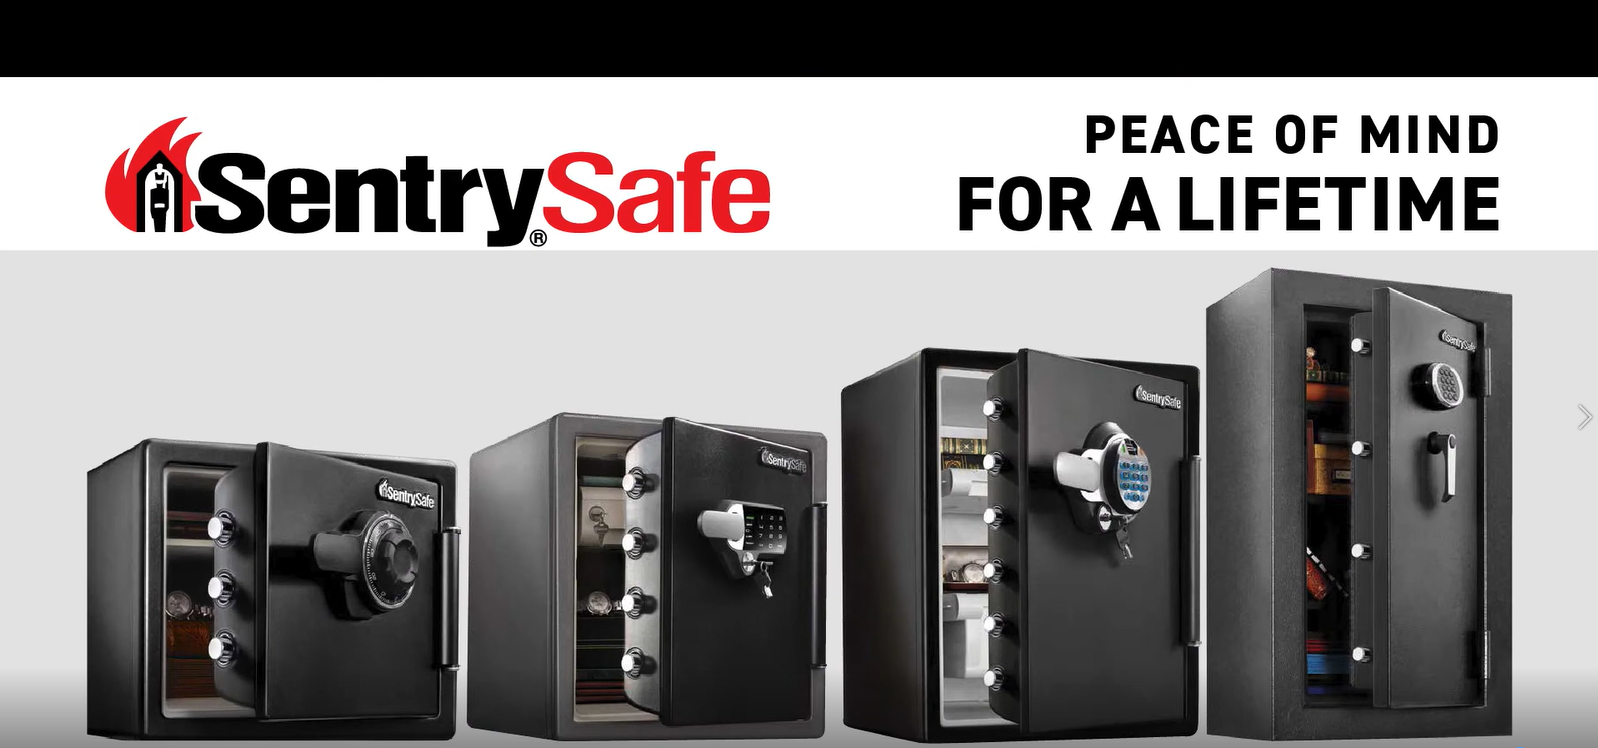 SentrySafe SFW123DTB Fire-Resistant and Water-Resistant Safe with Combination Lock, 1.23 cu. ft. - image 2 of 8